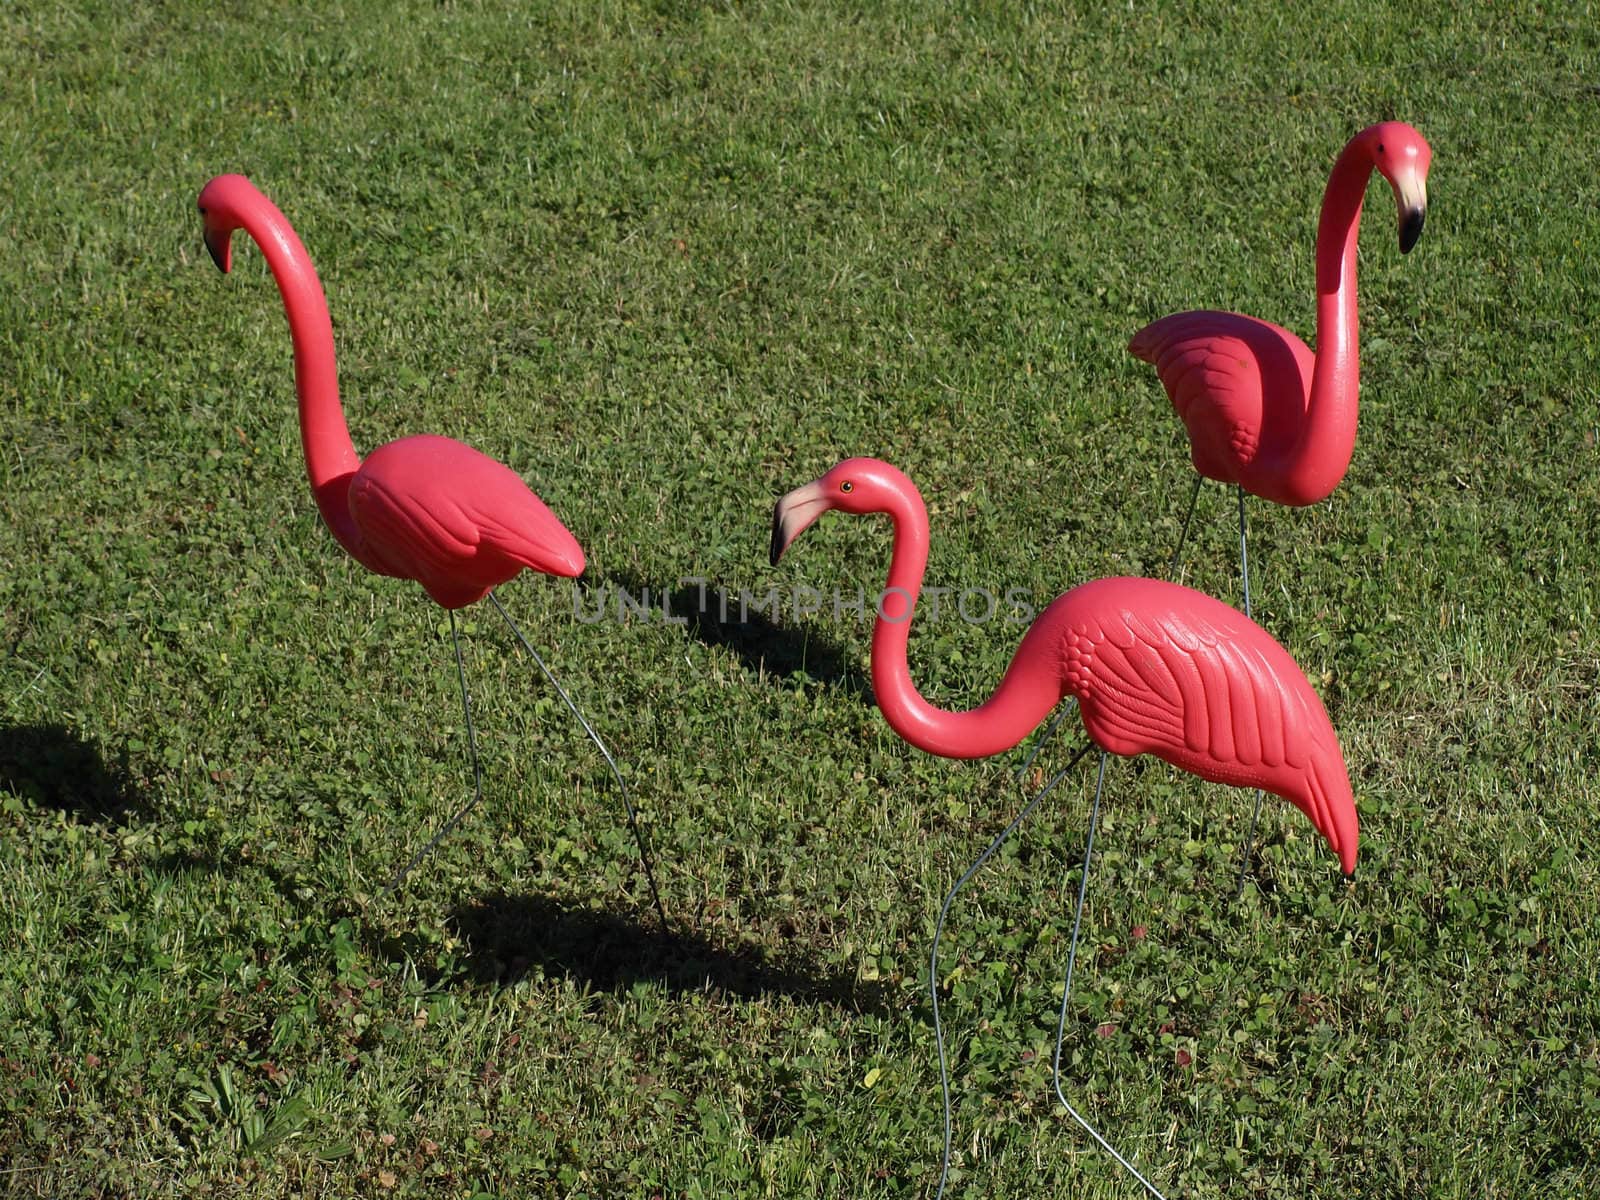 Three plastic pink flamingos out on a grass lawn